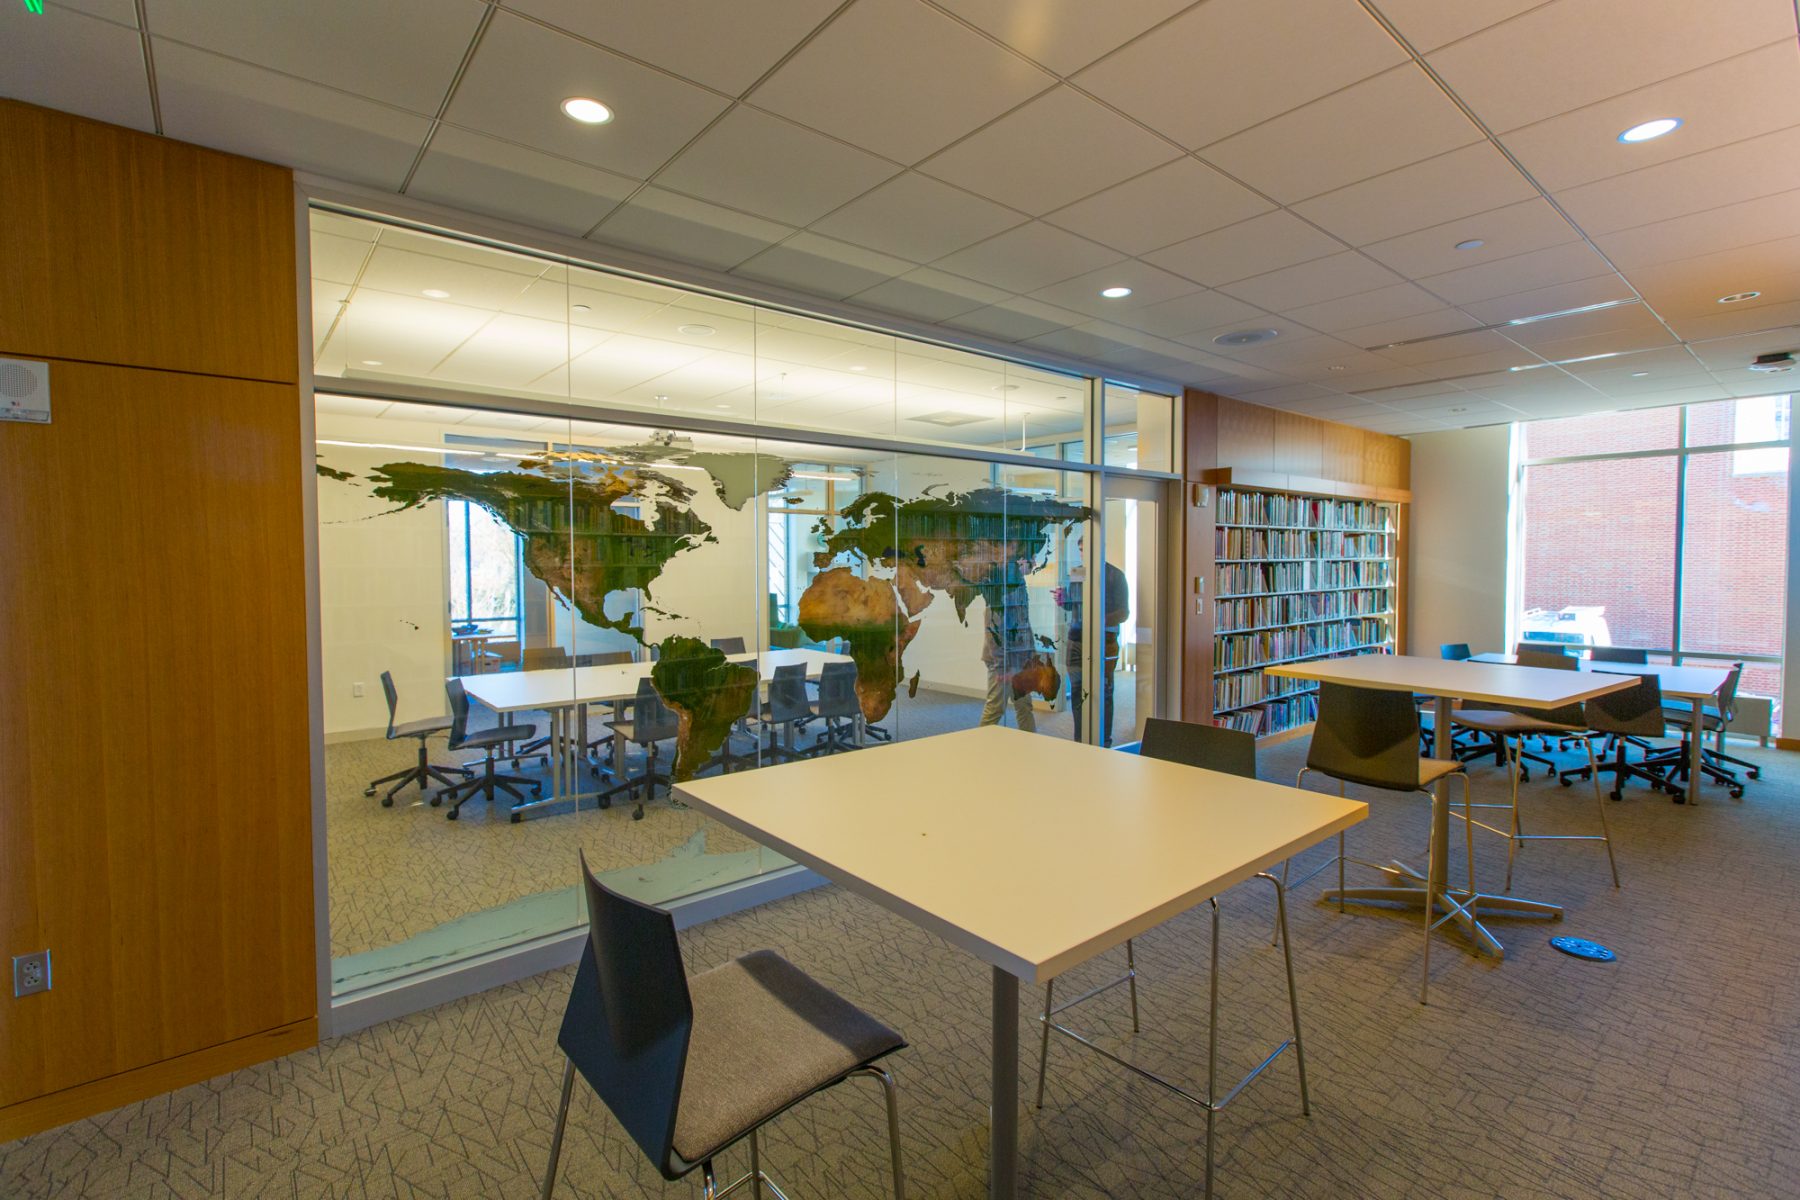 Deerfield Academy Boyden Library Interior, view of conference room